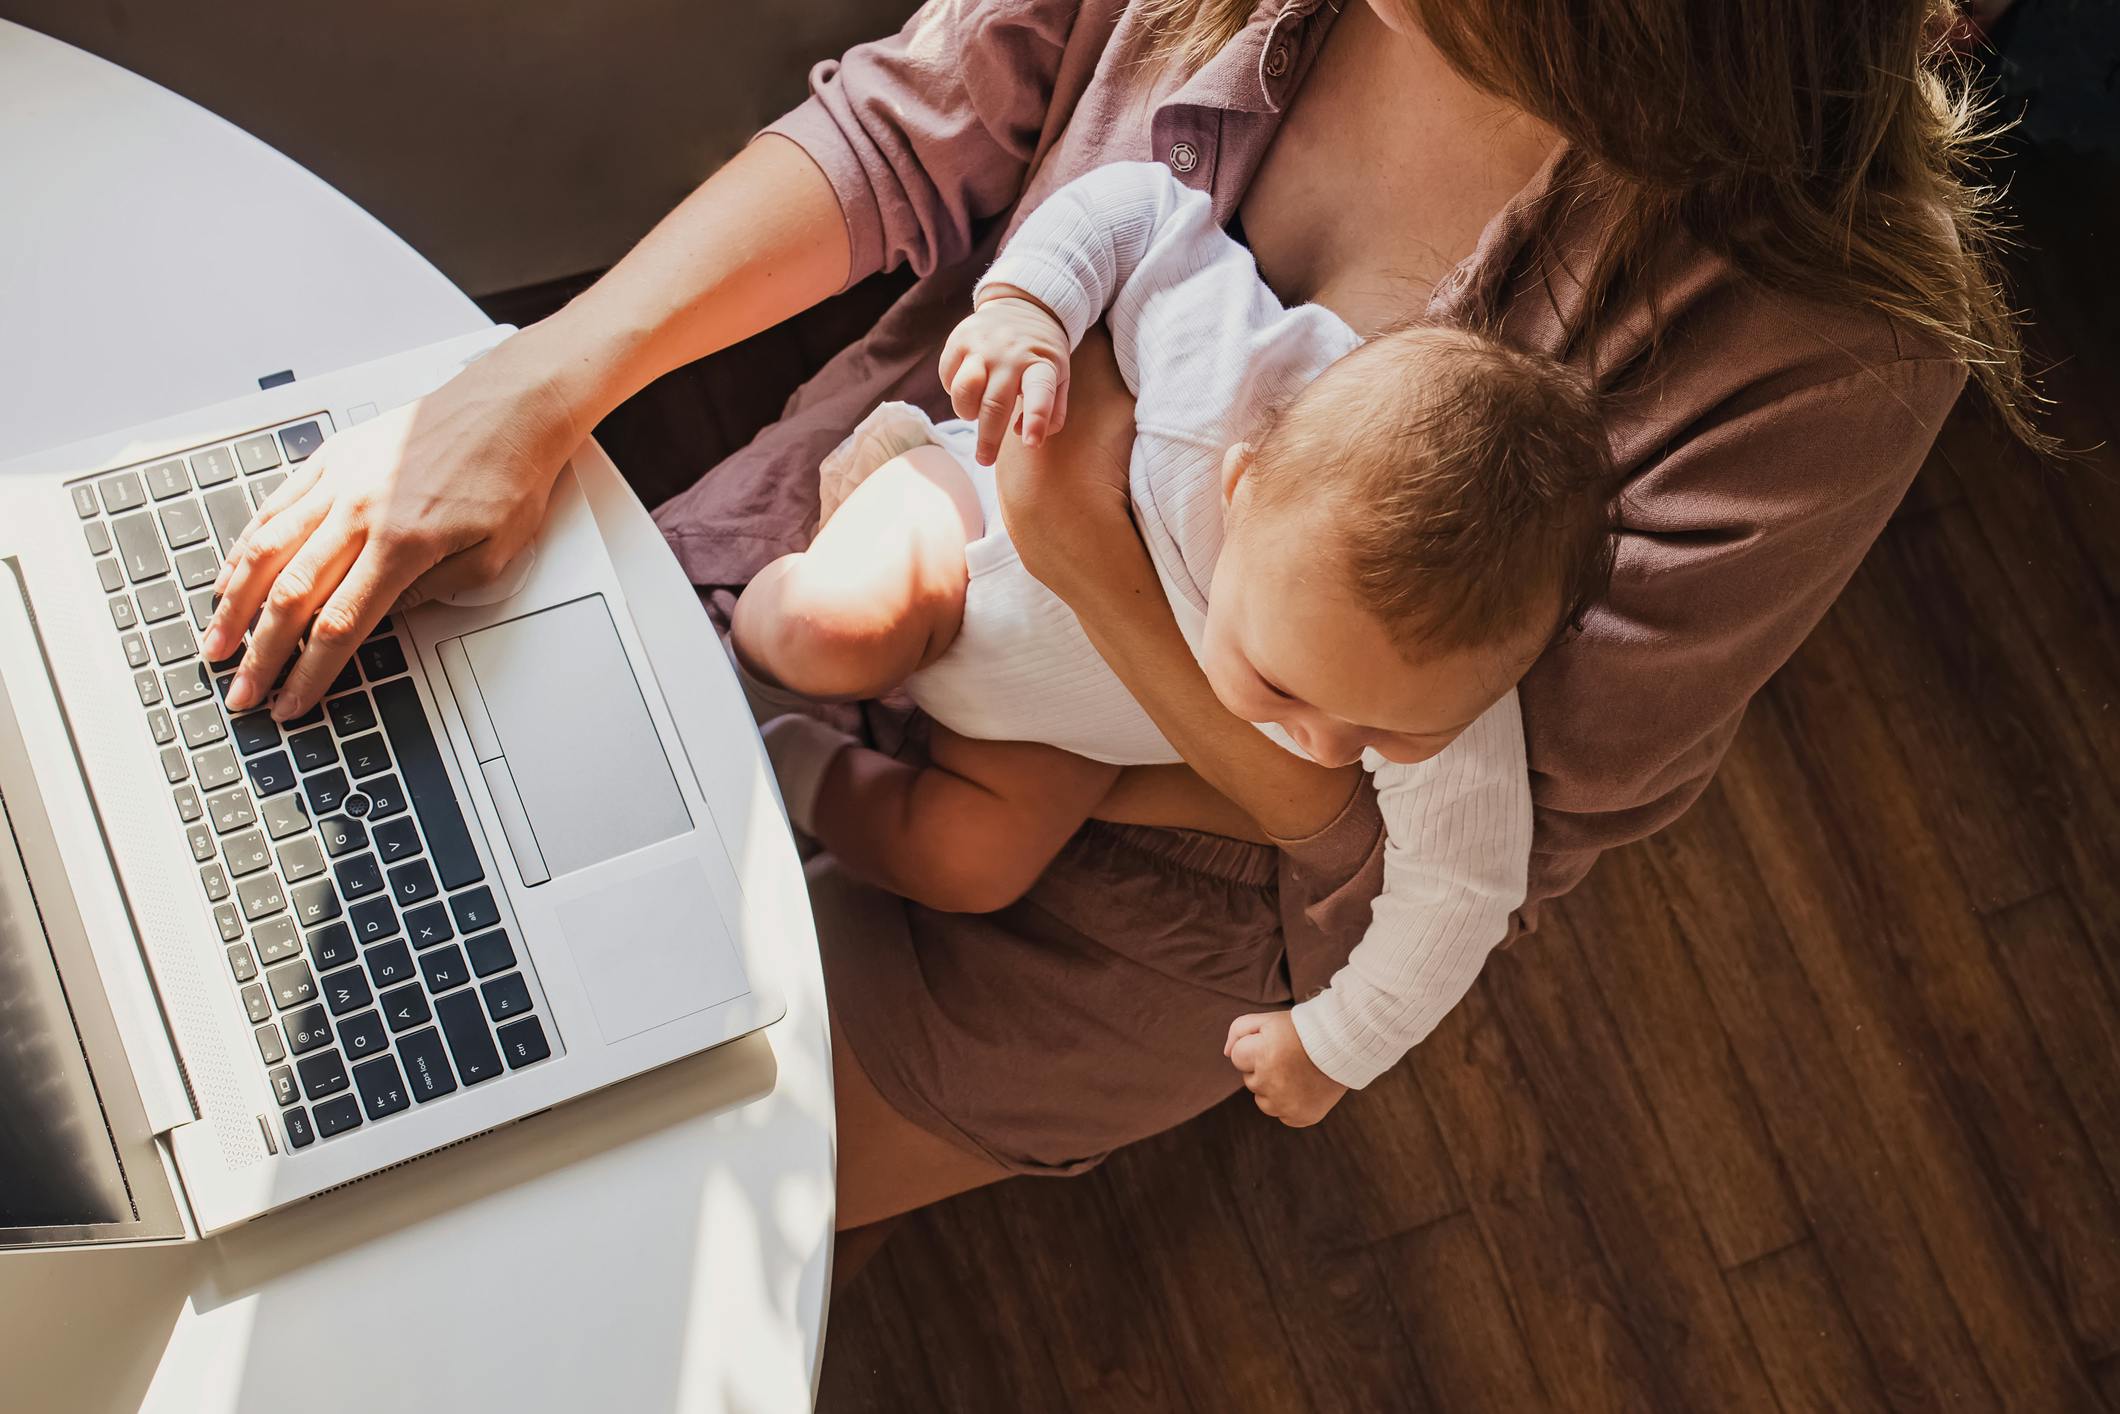 A person typing on a laptop while holding an infant